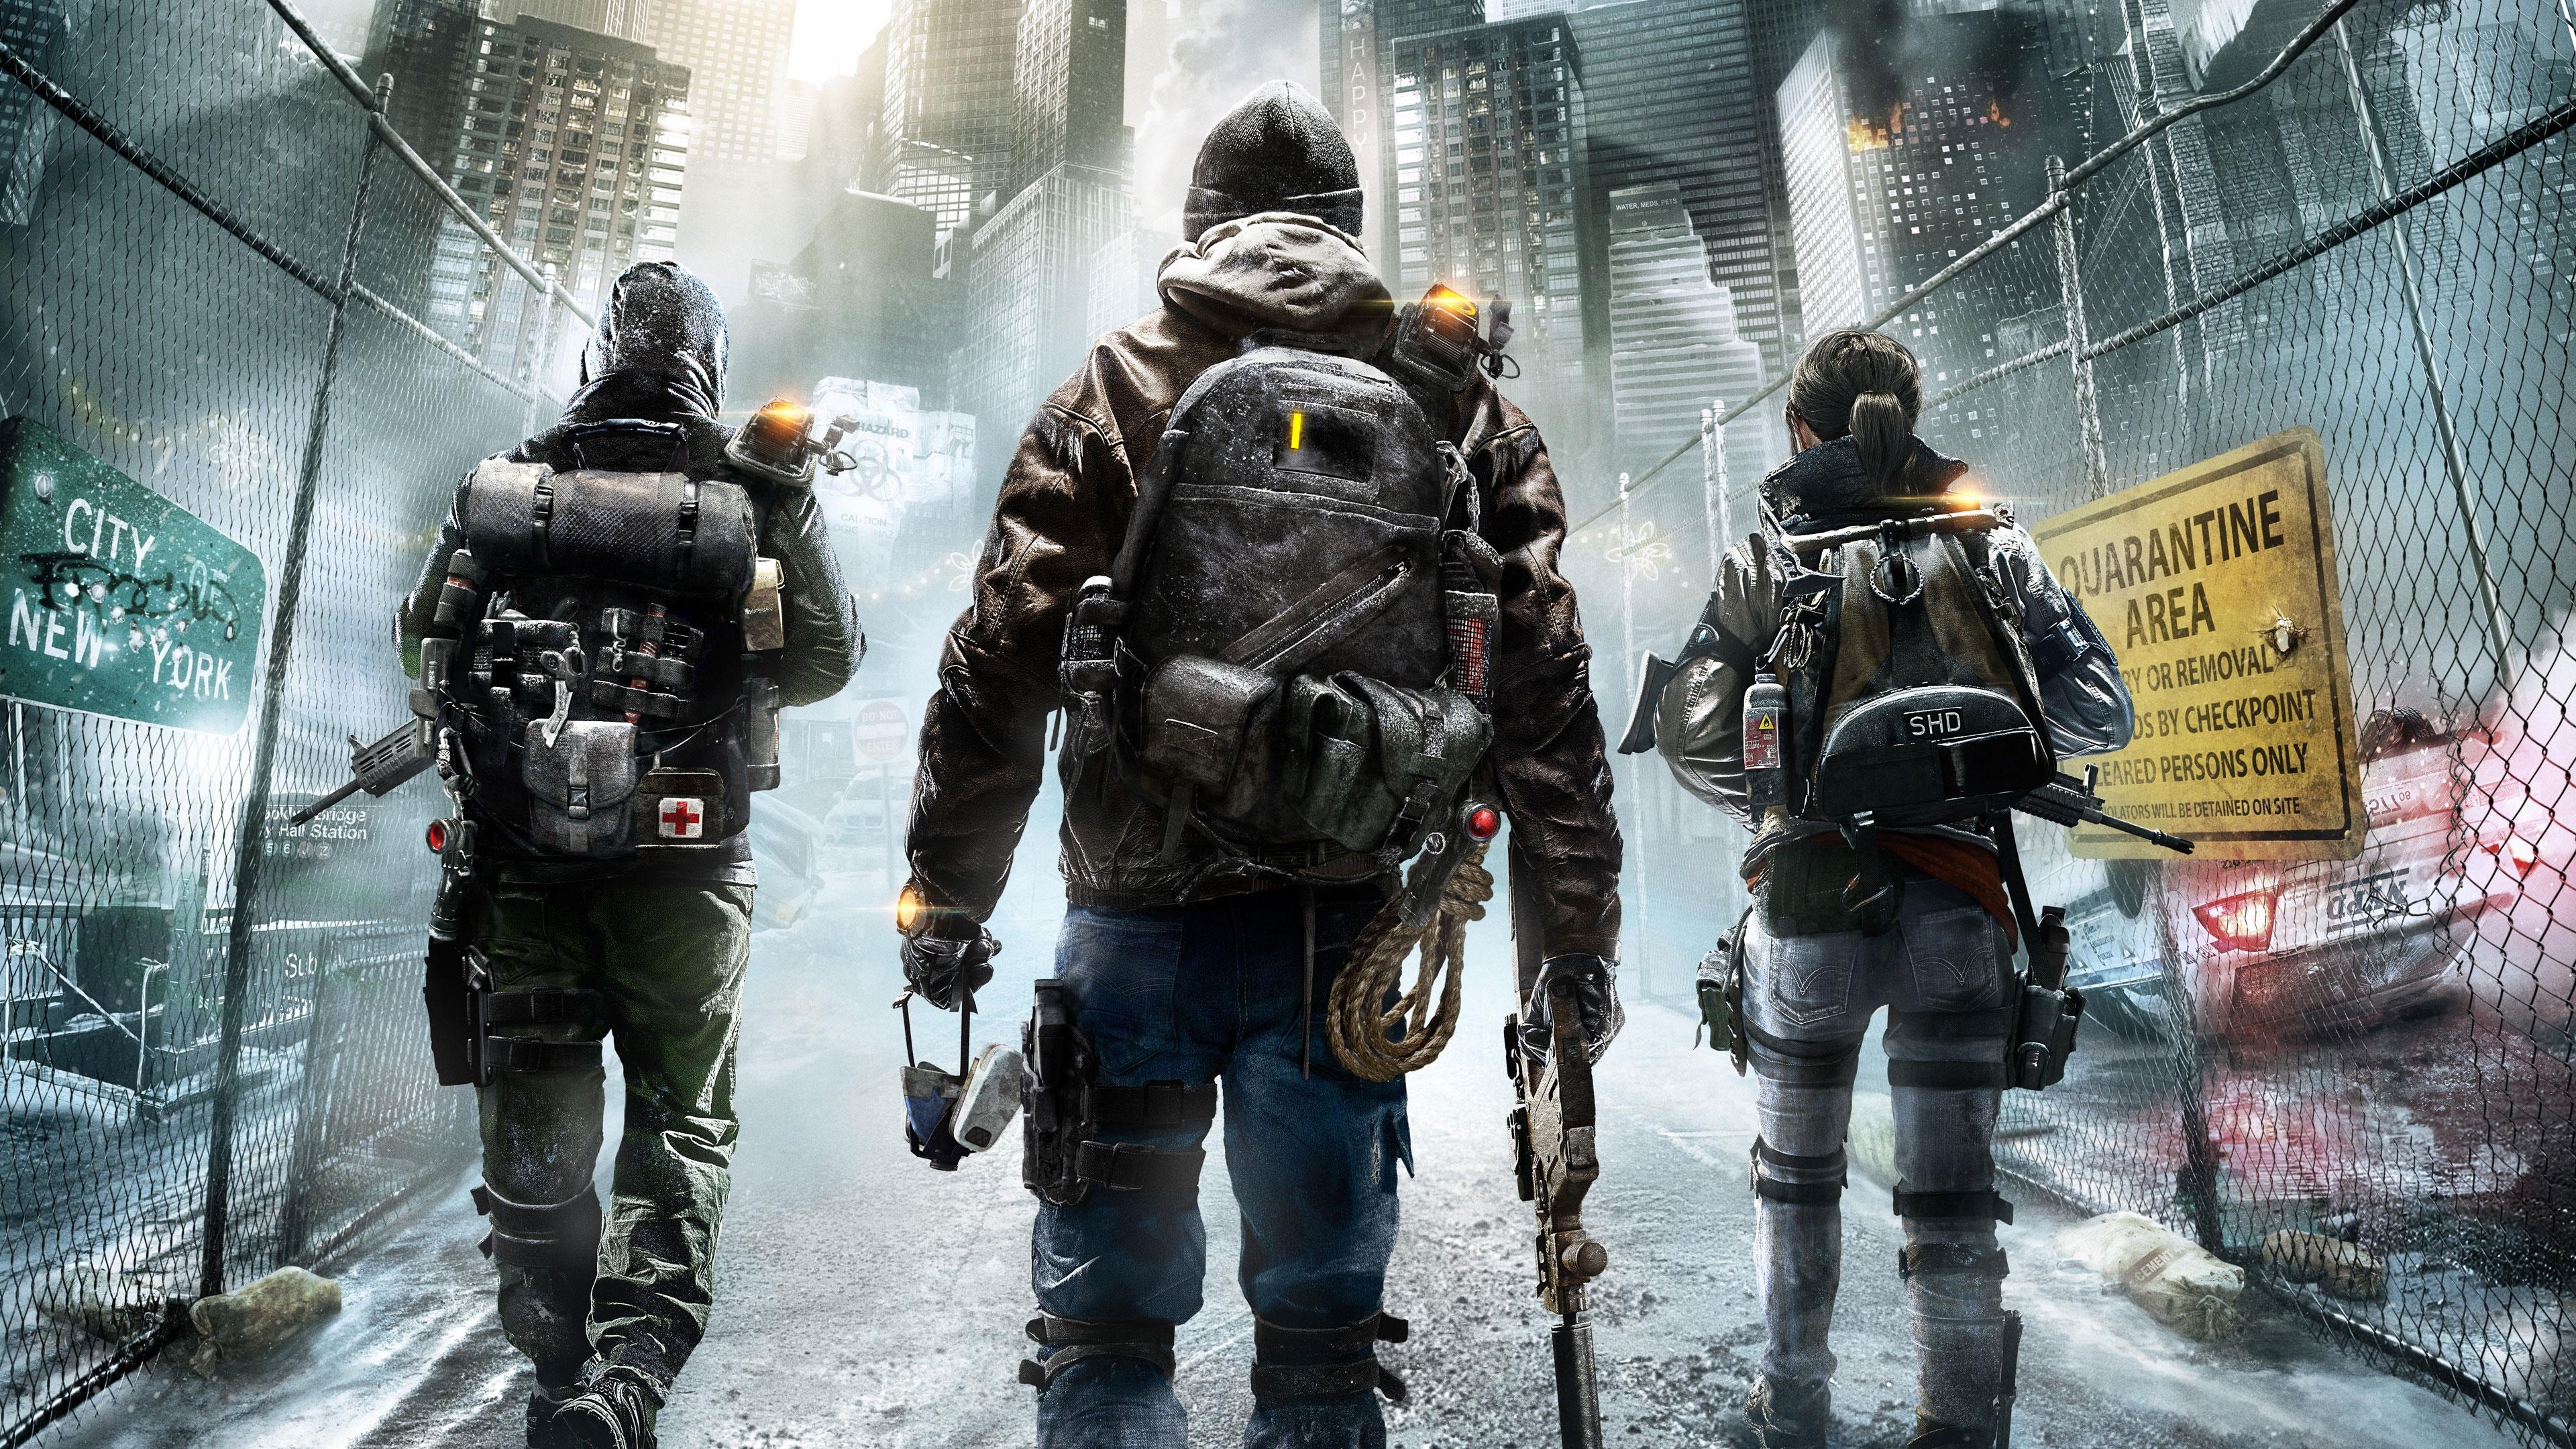 The Division Wallpaper in Ultra HDK